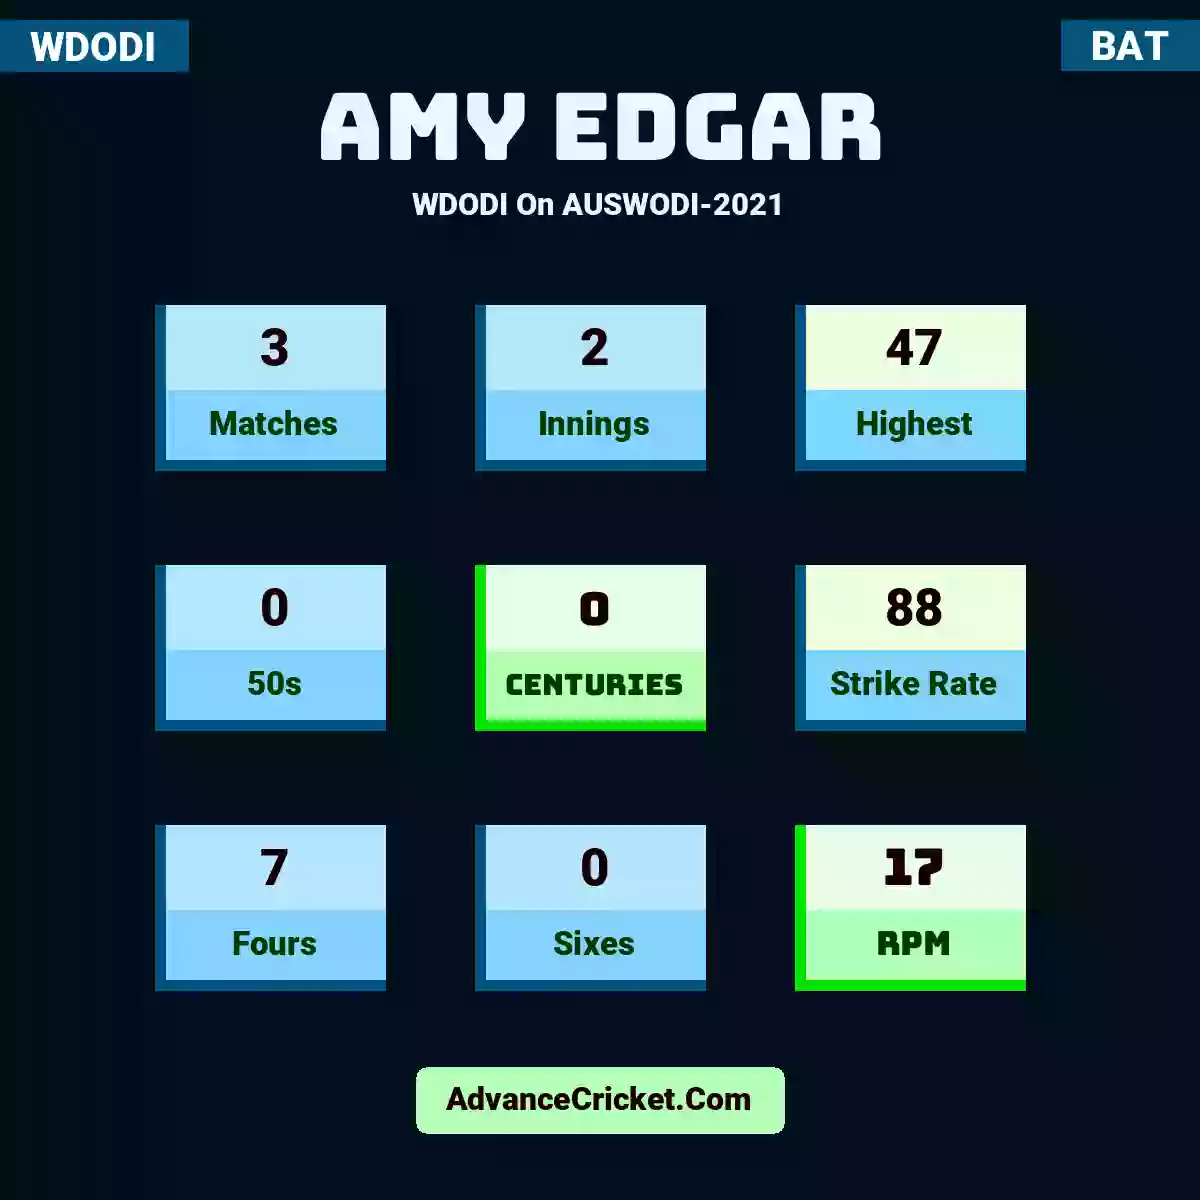 Amy Edgar WDODI  On AUSWODI-2021, Amy Edgar played 3 matches, scored 47 runs as highest, 0 half-centuries, and 0 centuries, with a strike rate of 88. A.Edgar hit 7 fours and 0 sixes, with an RPM of 17.